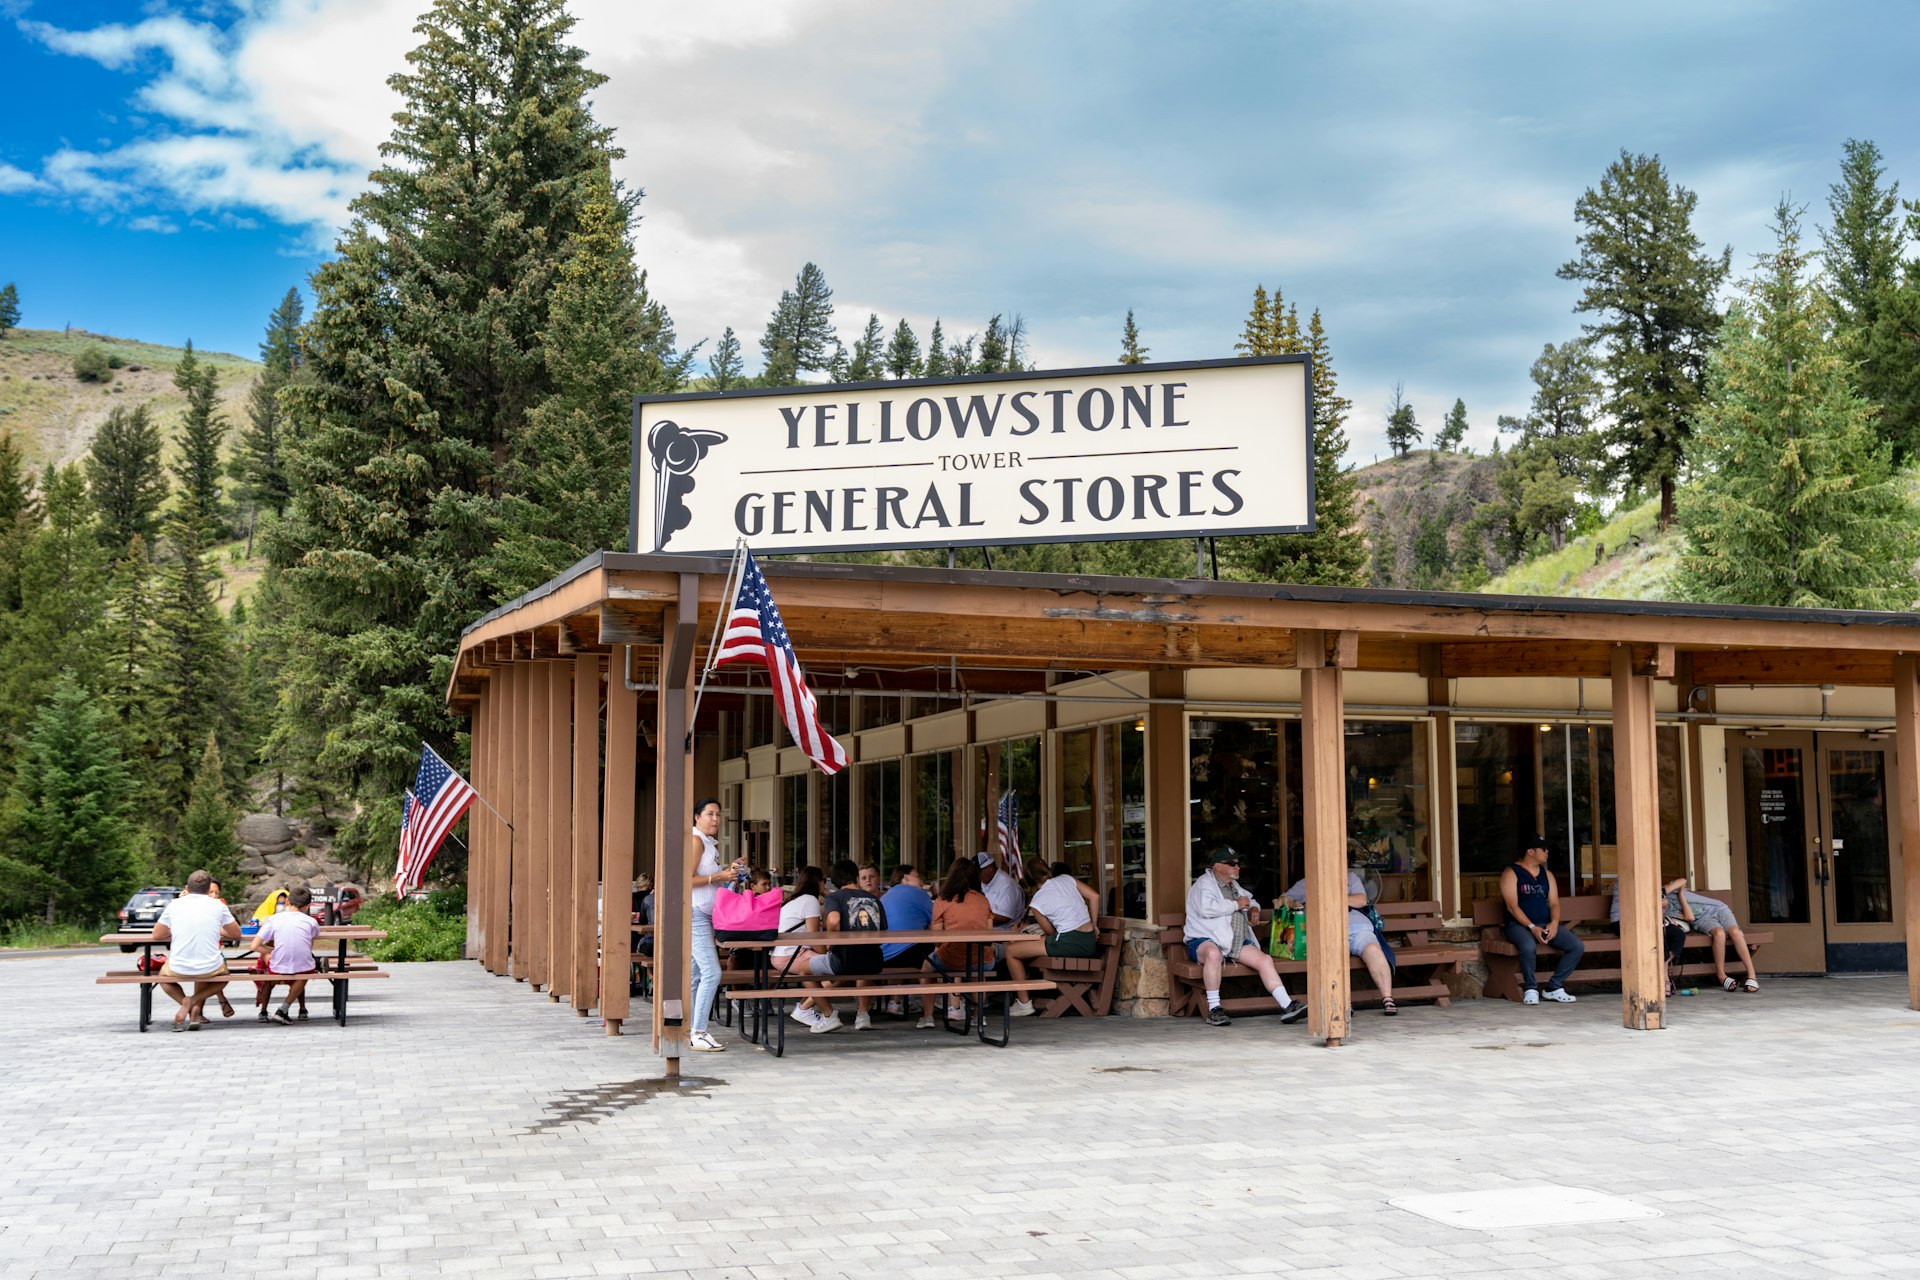 People mingle outside of the Yellowstone Tower Falls General Store in Yellowstone National Park